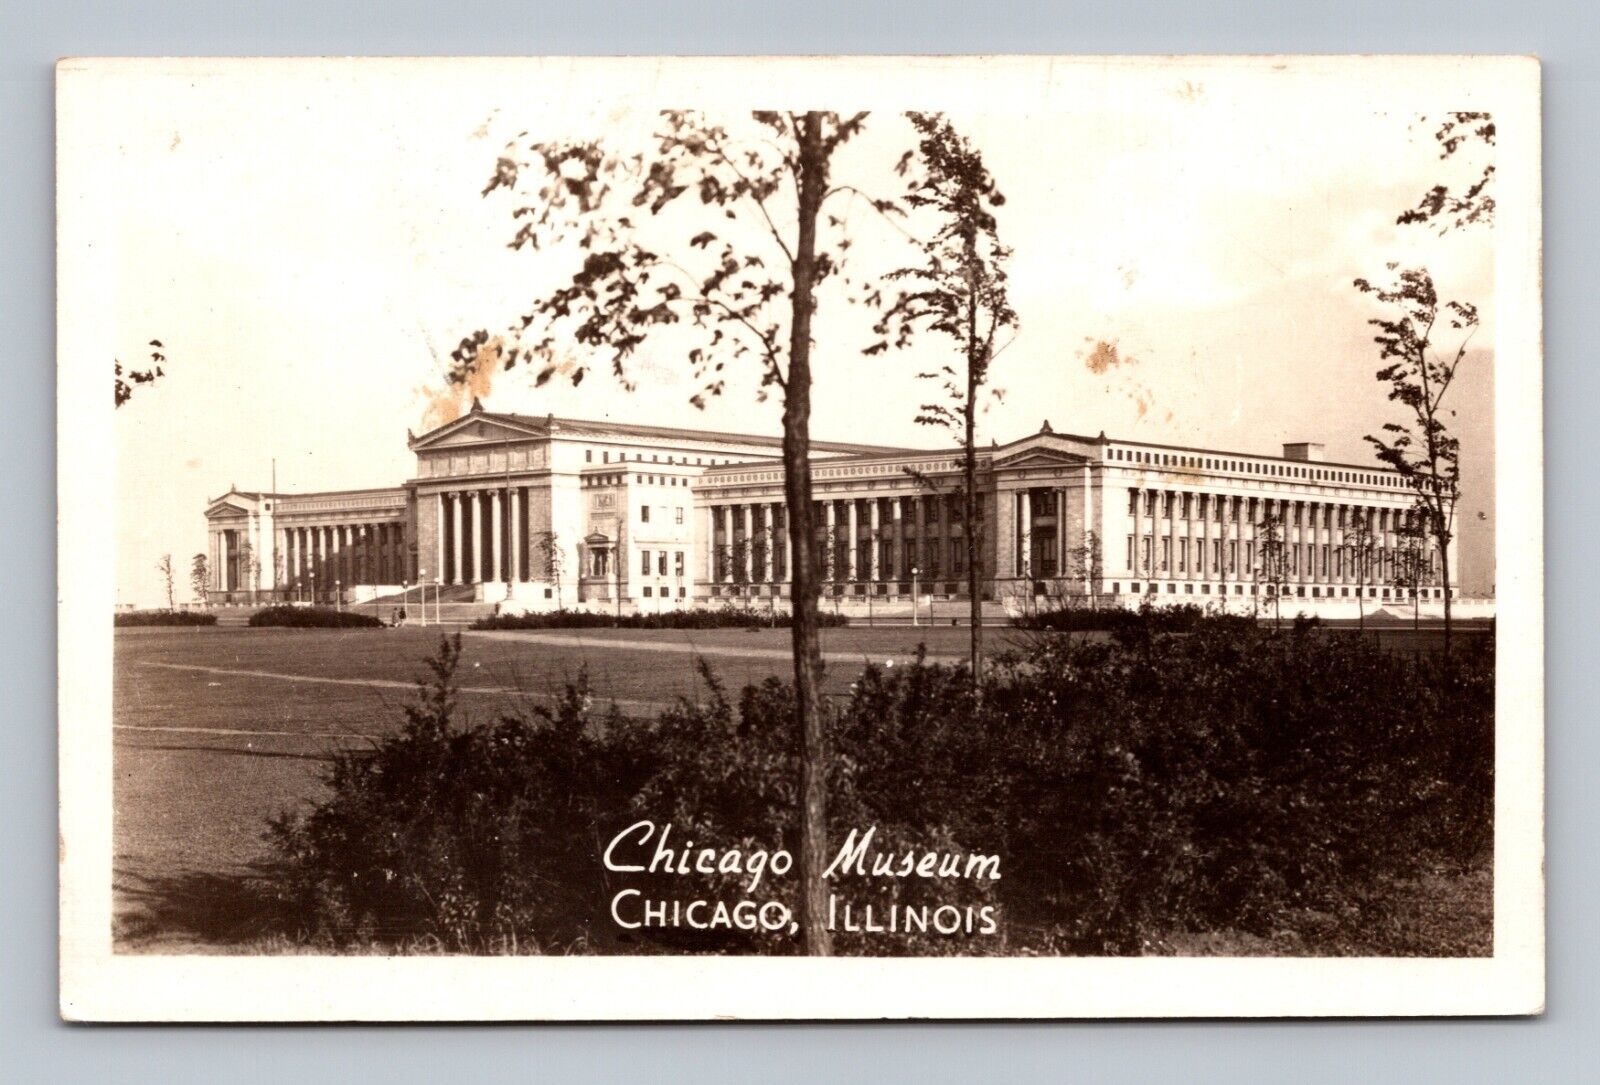 CHICAGO ILLINOIS OLD VIEW OF THE CHICAGO MUSEUM RPPC REAL PHOTO POSTCARD (H-31)